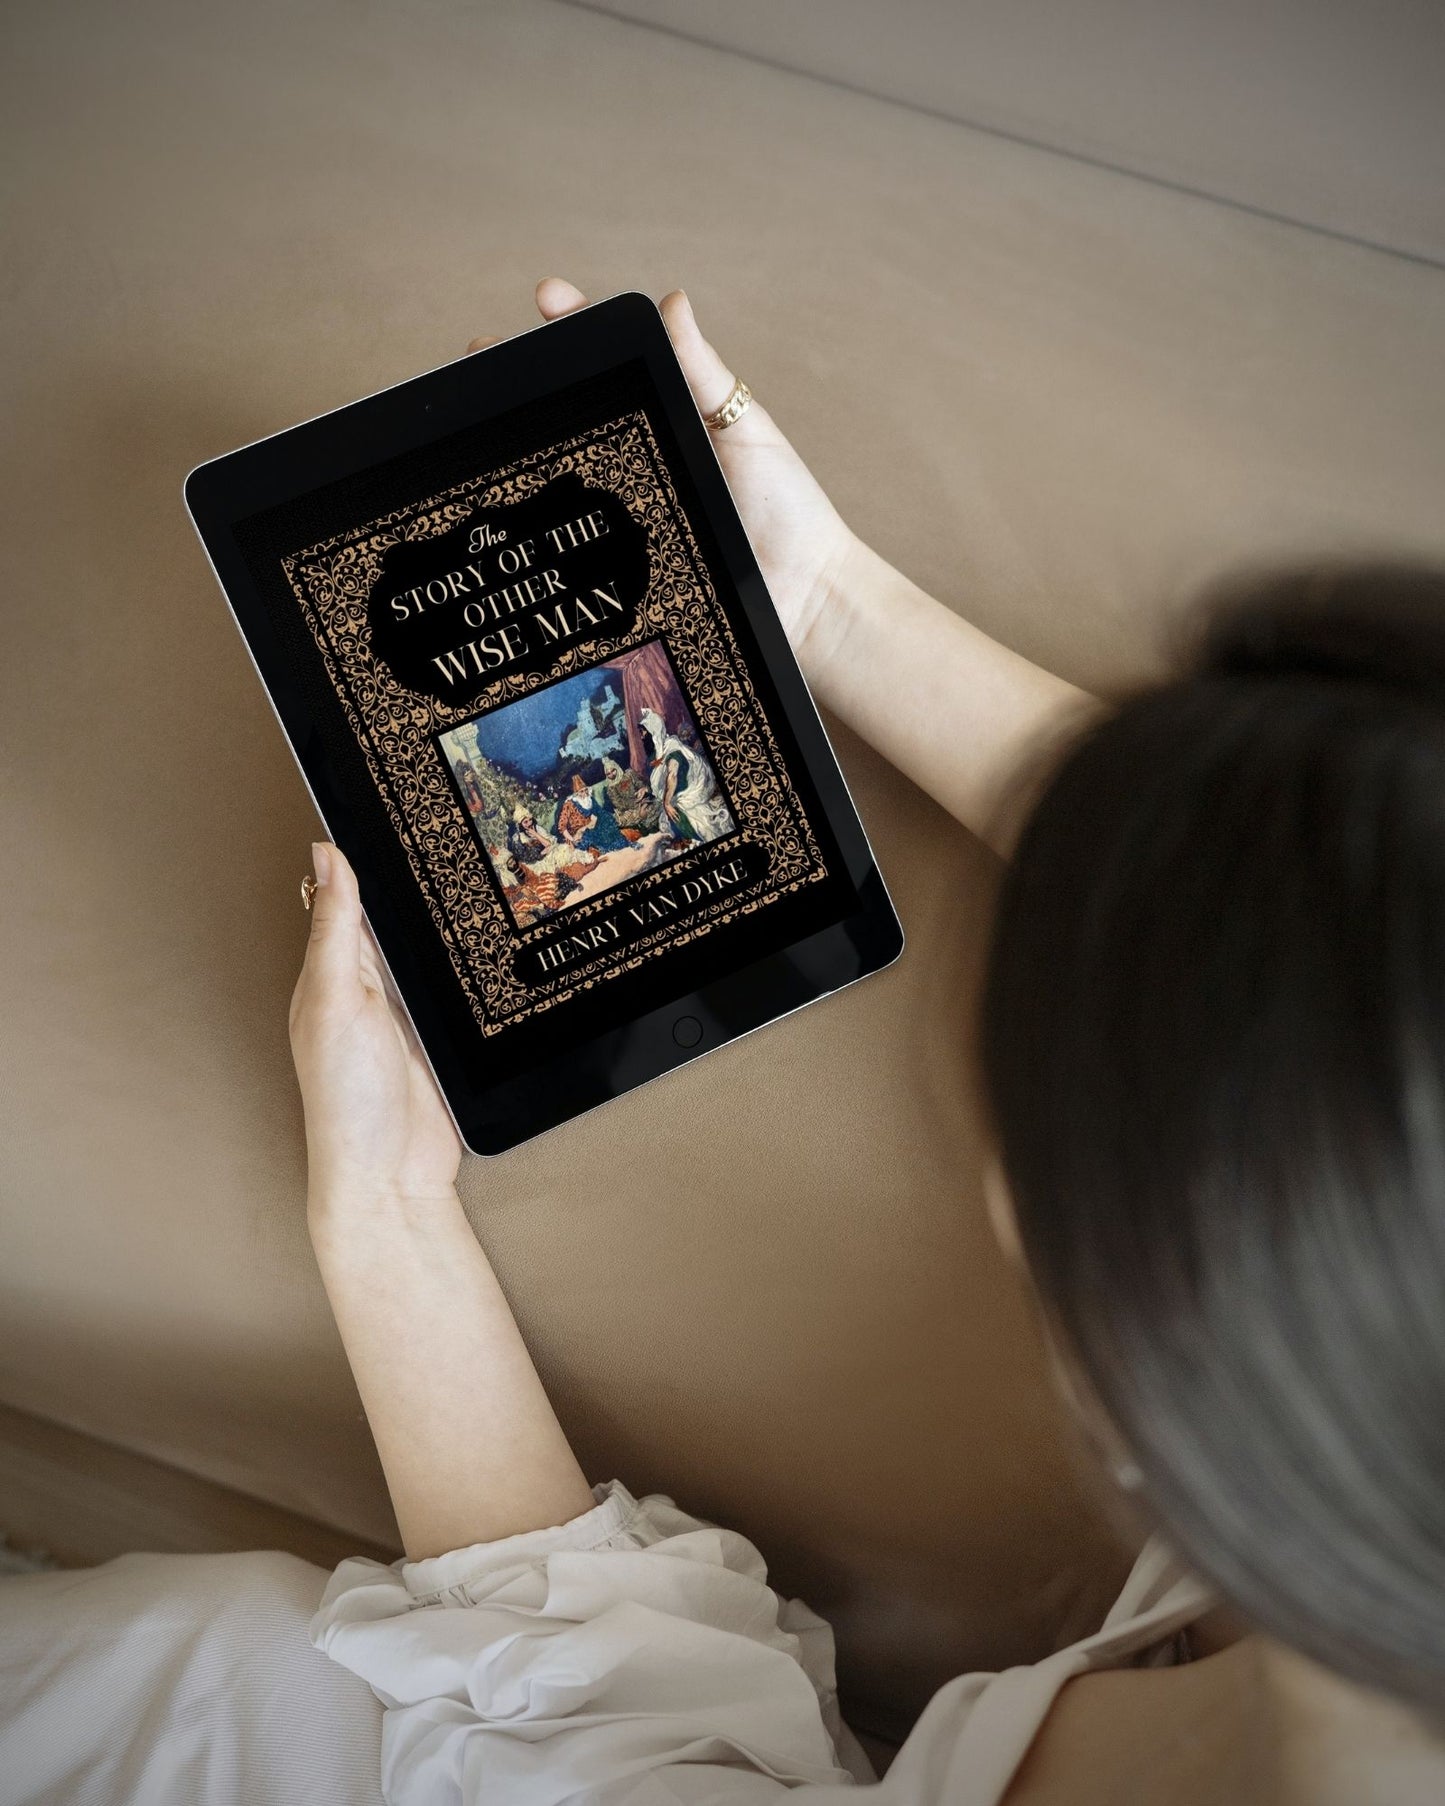 A dark haired woman holds a black tablet with the ornate black and gold cover of the ebook "The Story of the Other Wise Man."